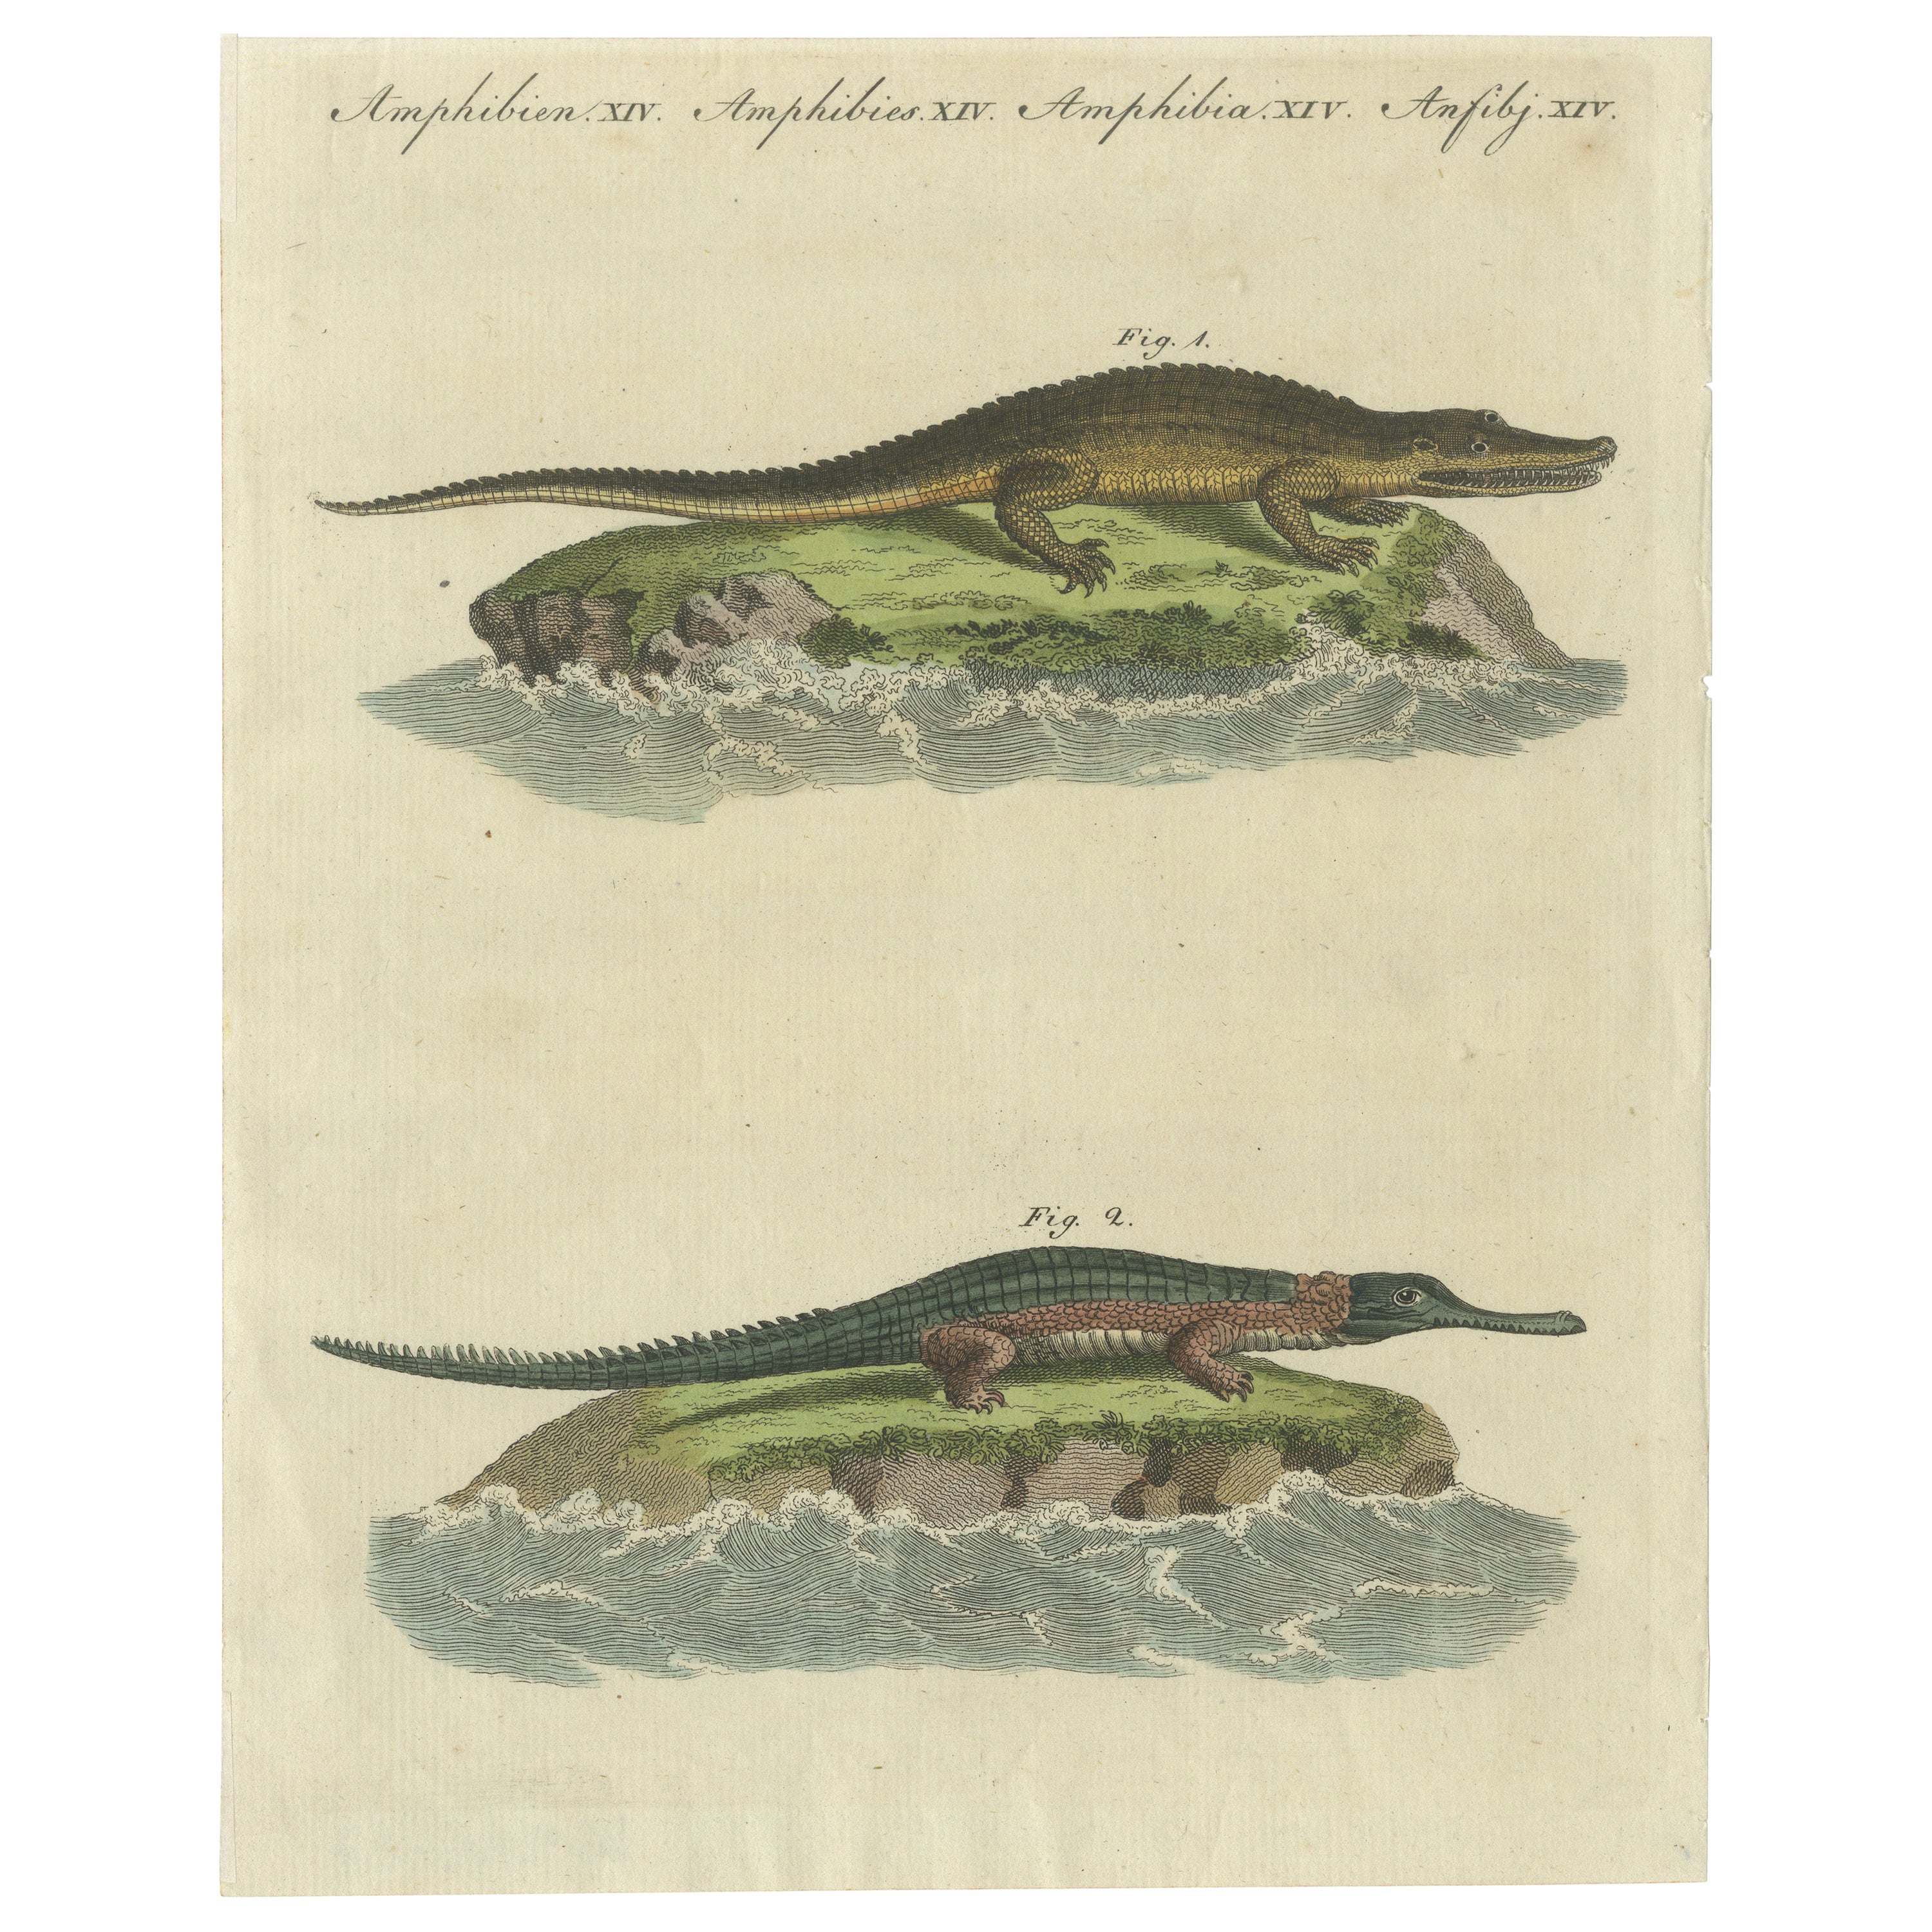 Antique Print of the Caiman Alligator and an other Crocodile species For Sale